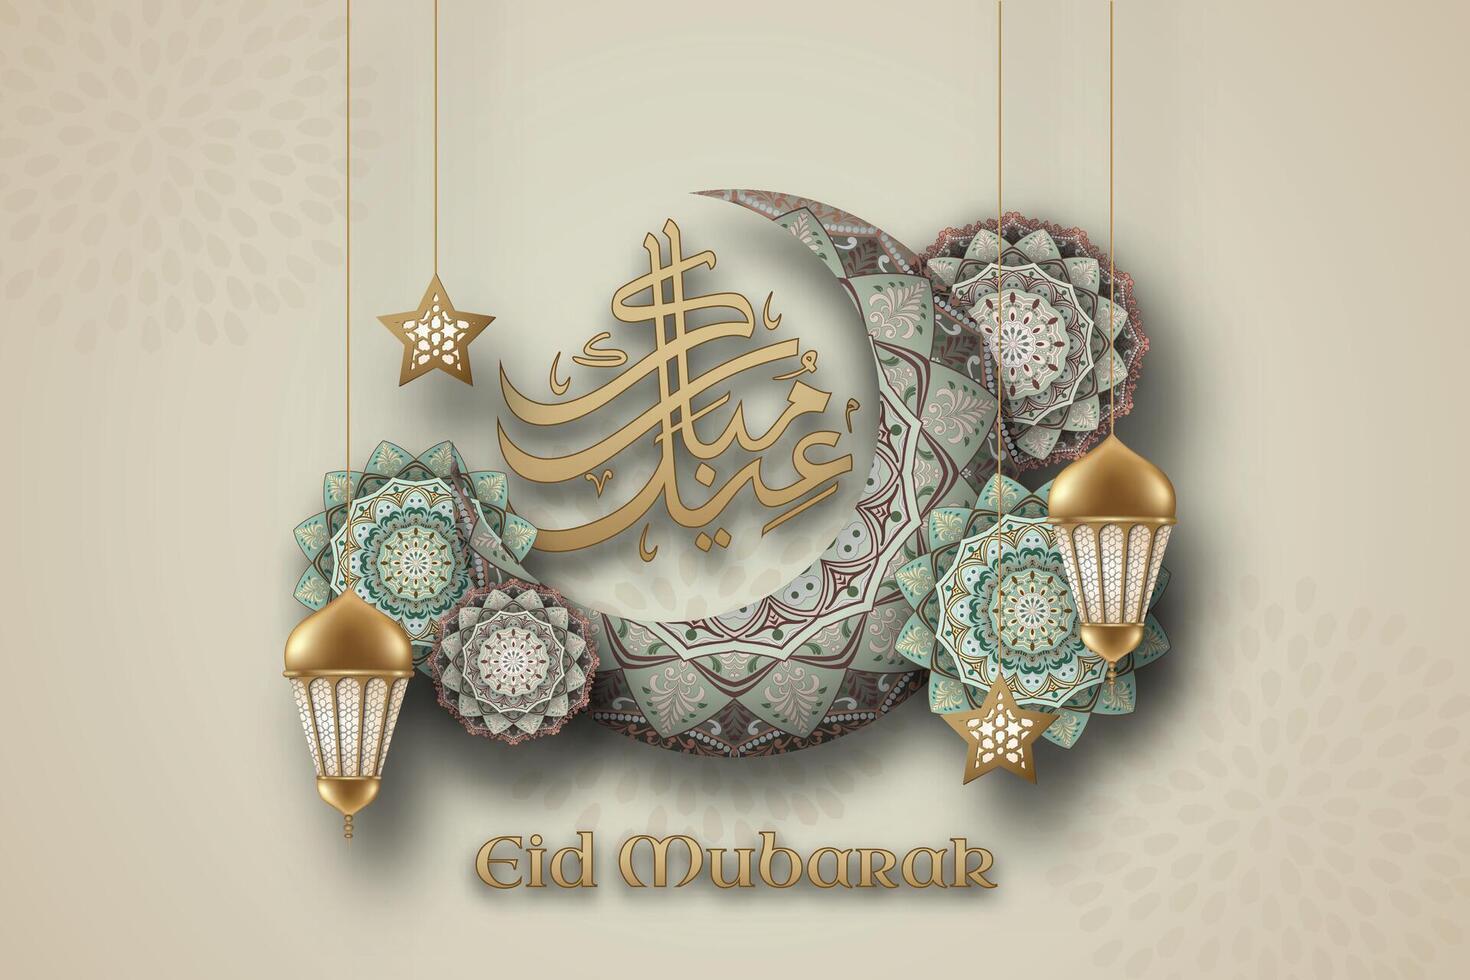 A poster for eid mubarak with a crescent moon and ornaments islamic. vector